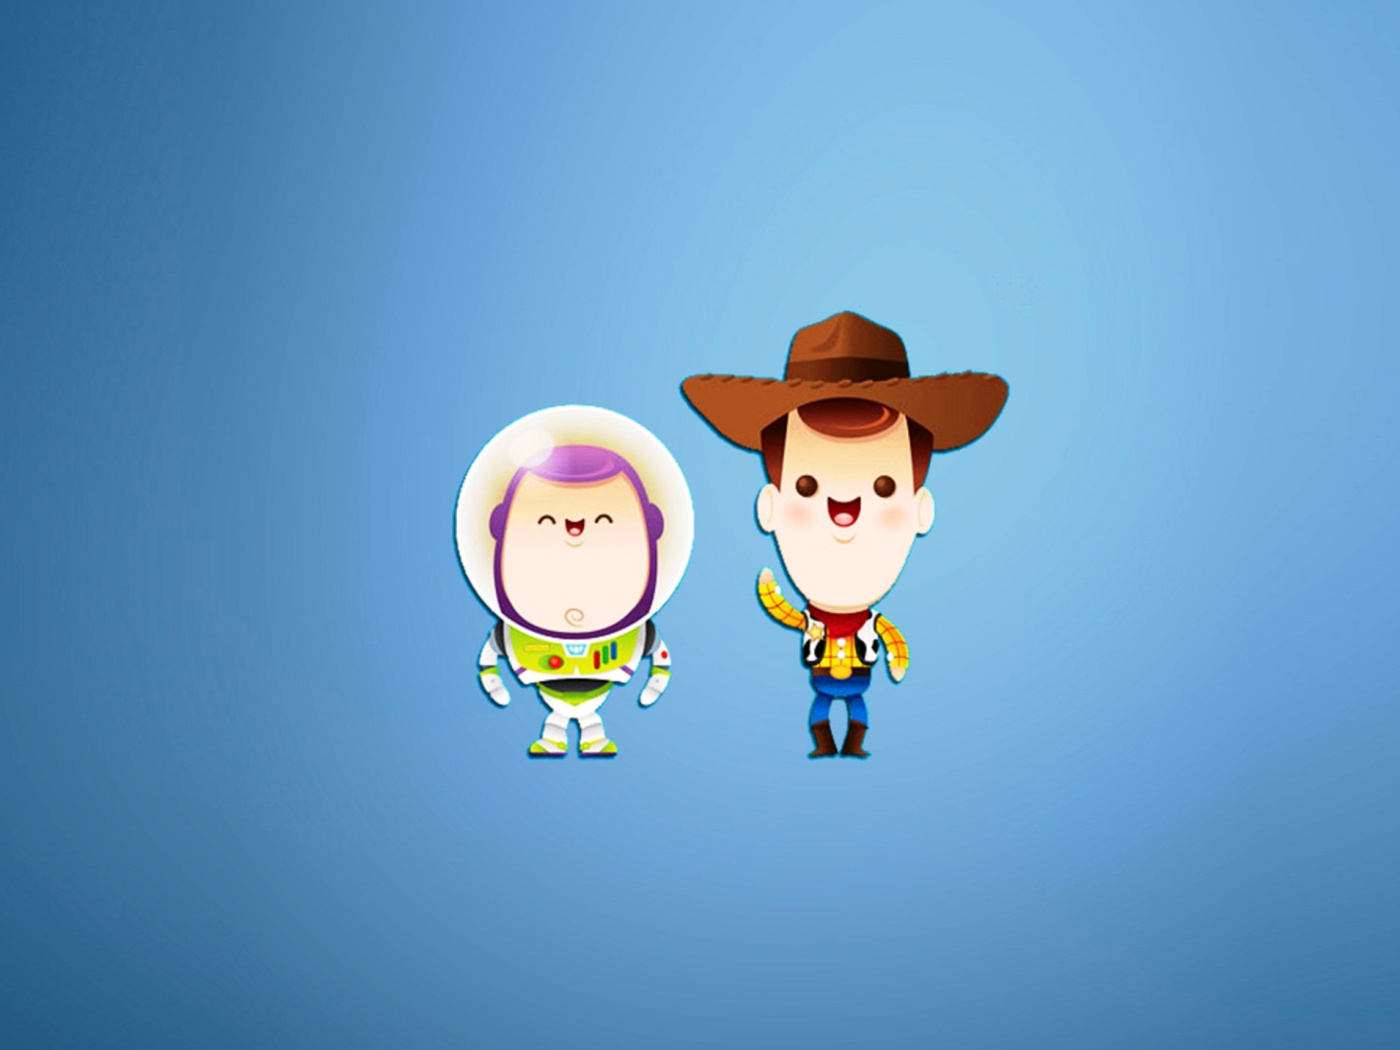 Buzz and Woody in Toy Story wallpaper 1400x1050